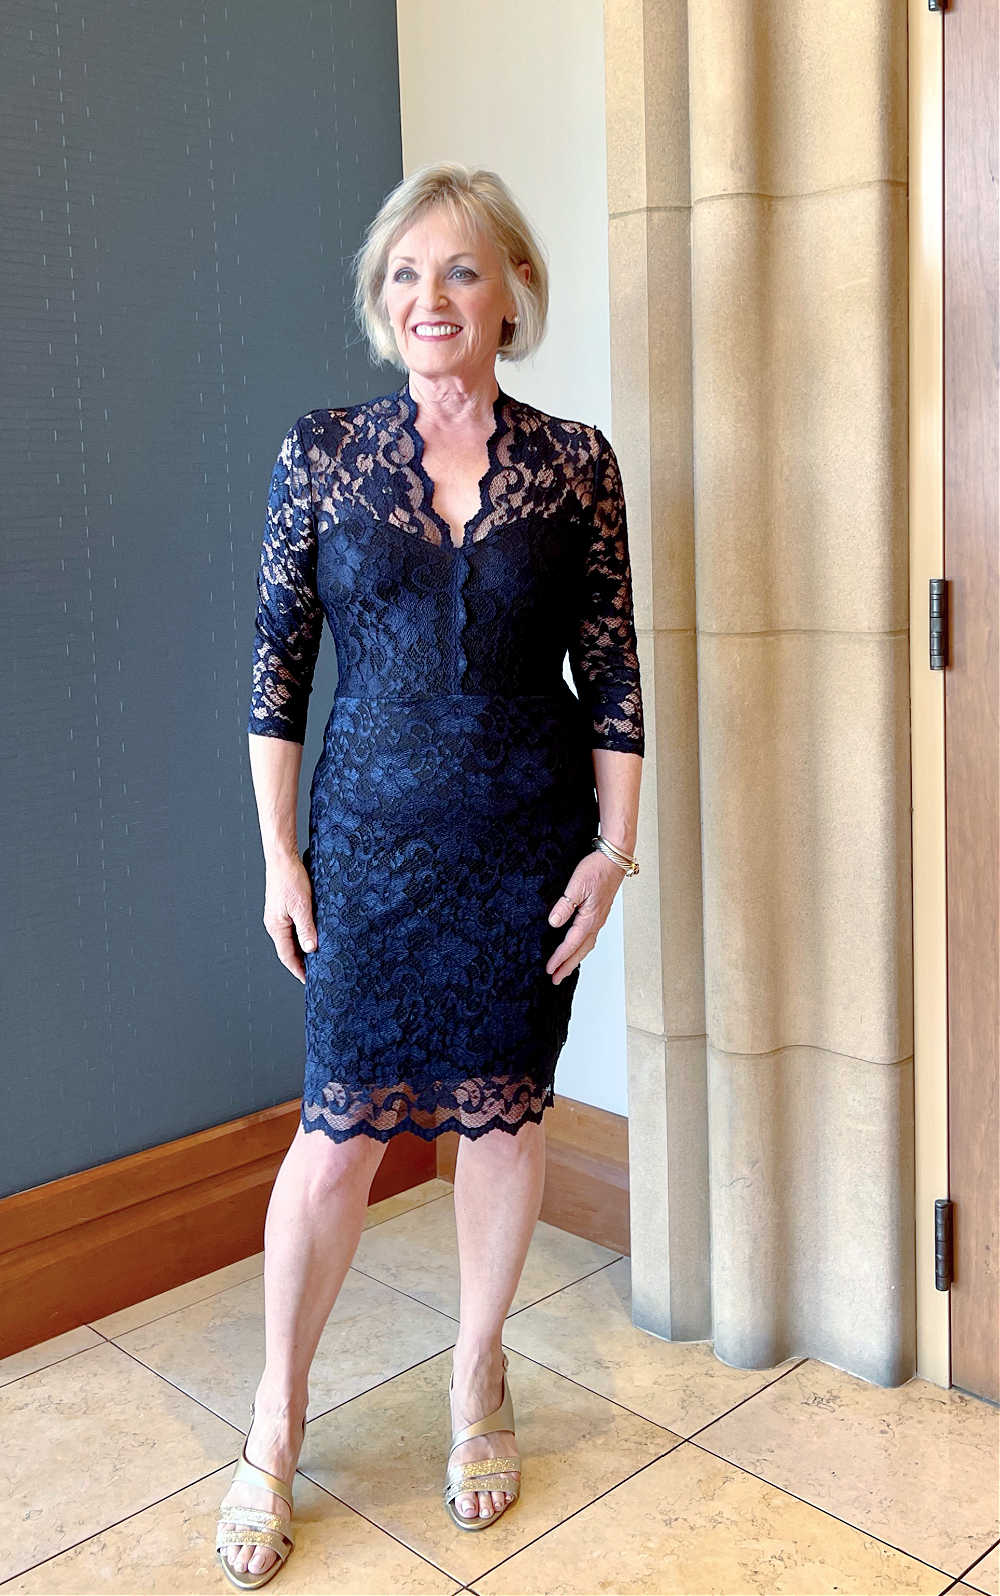 women over 50 wearing blue lace dress for special occasion